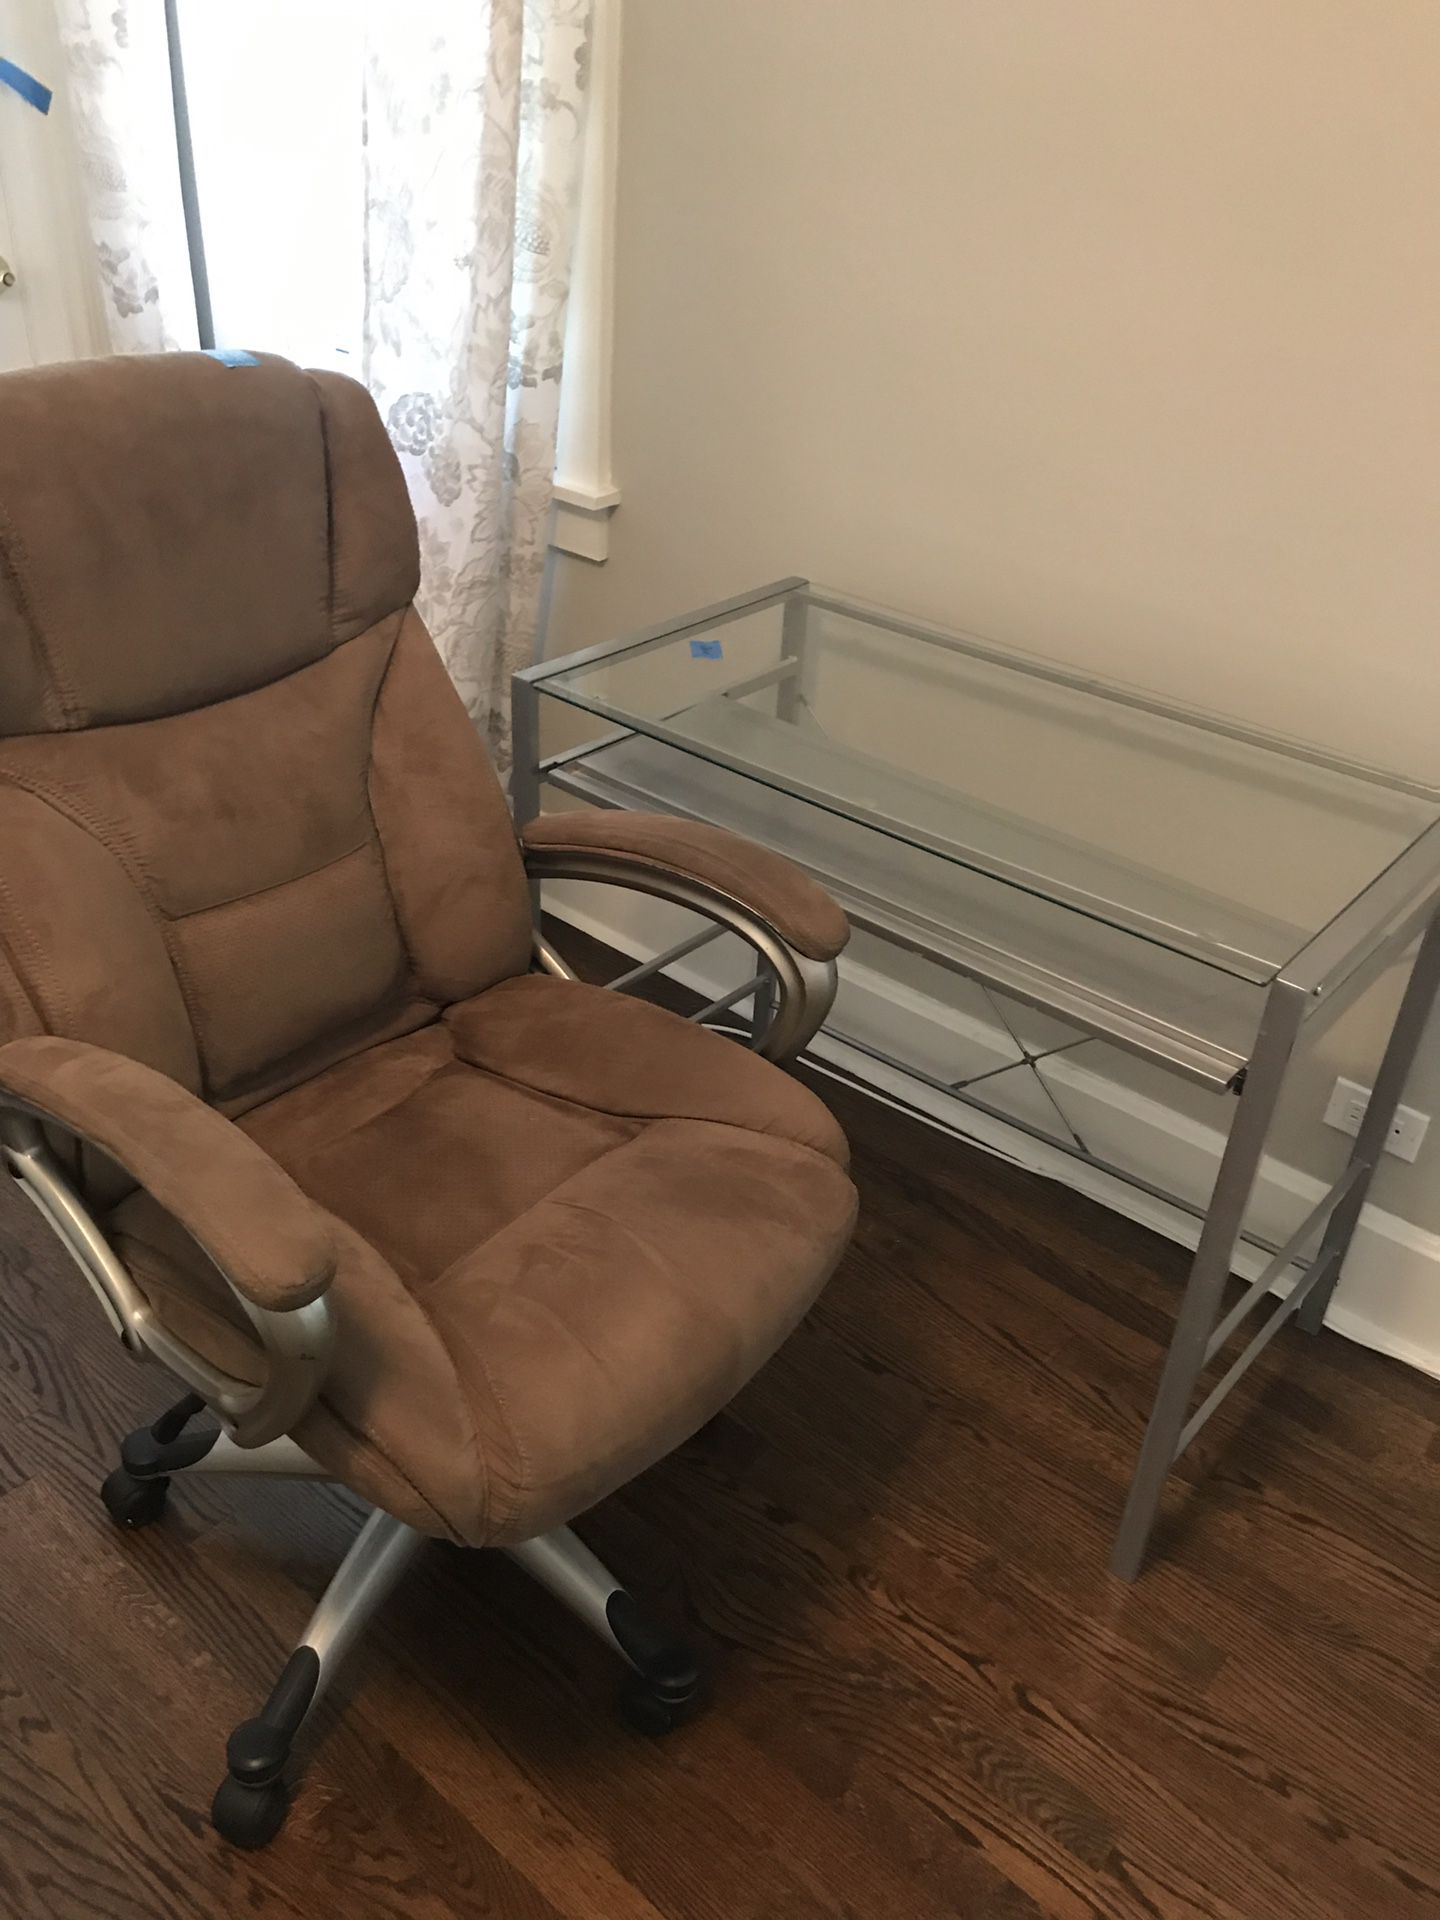 Computer chair with desk